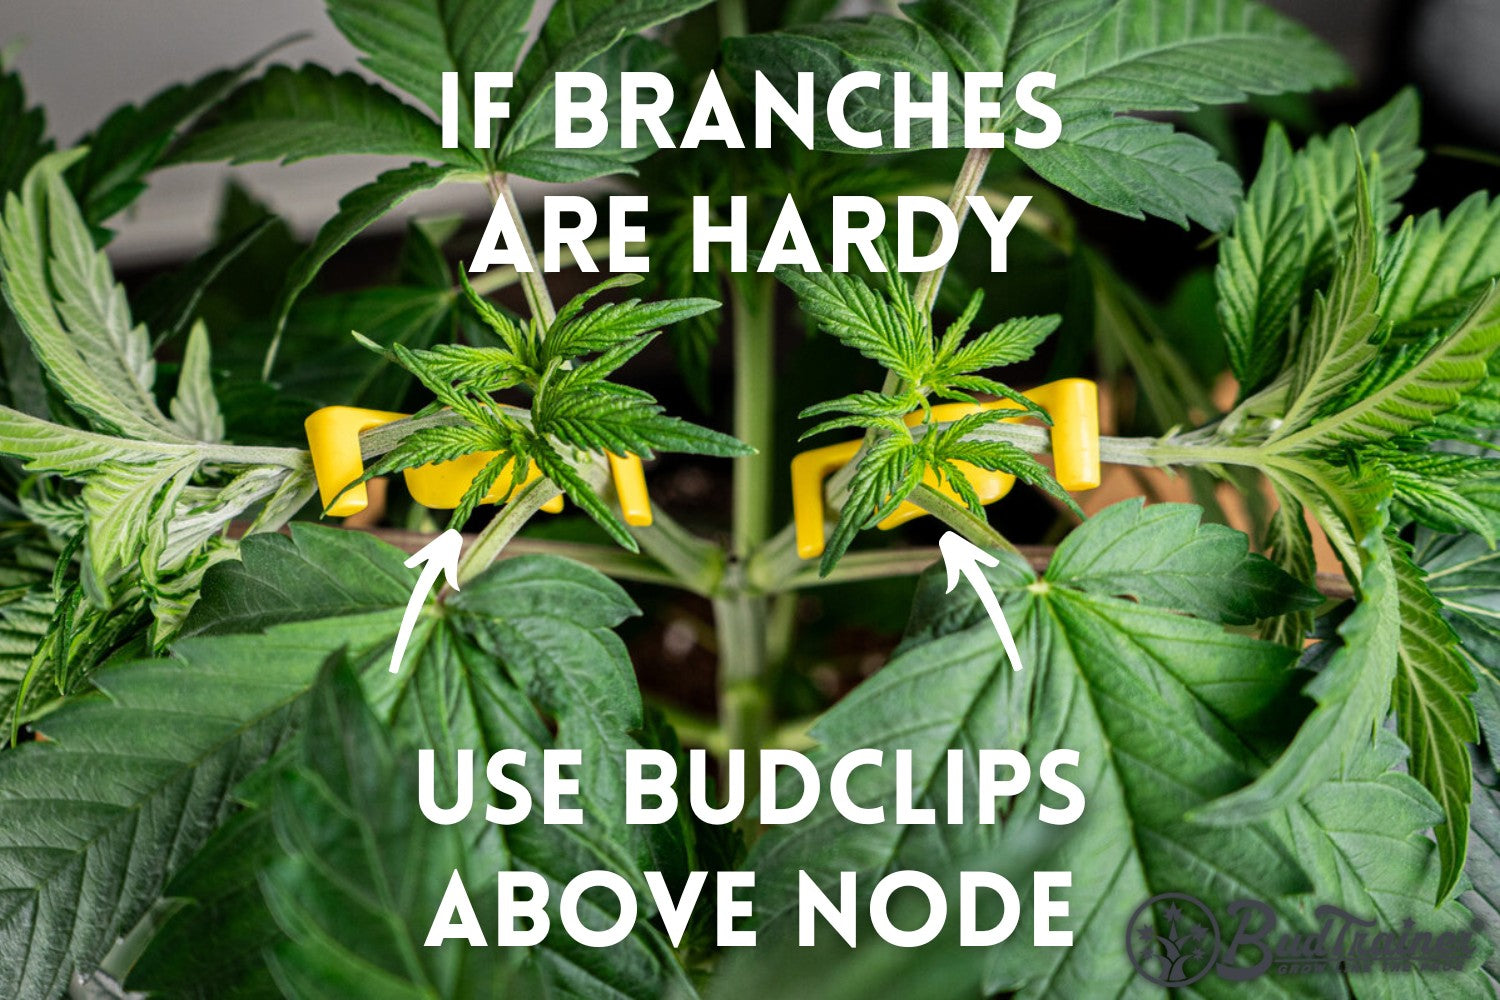 Cannabis plant branches being trained with yellow BudClips above the node, with the text “If Branches Are Hardy Use BudClips Above Node” and arrows pointing to the BudClips, and the BudTrainer logo in the bottom right corner.